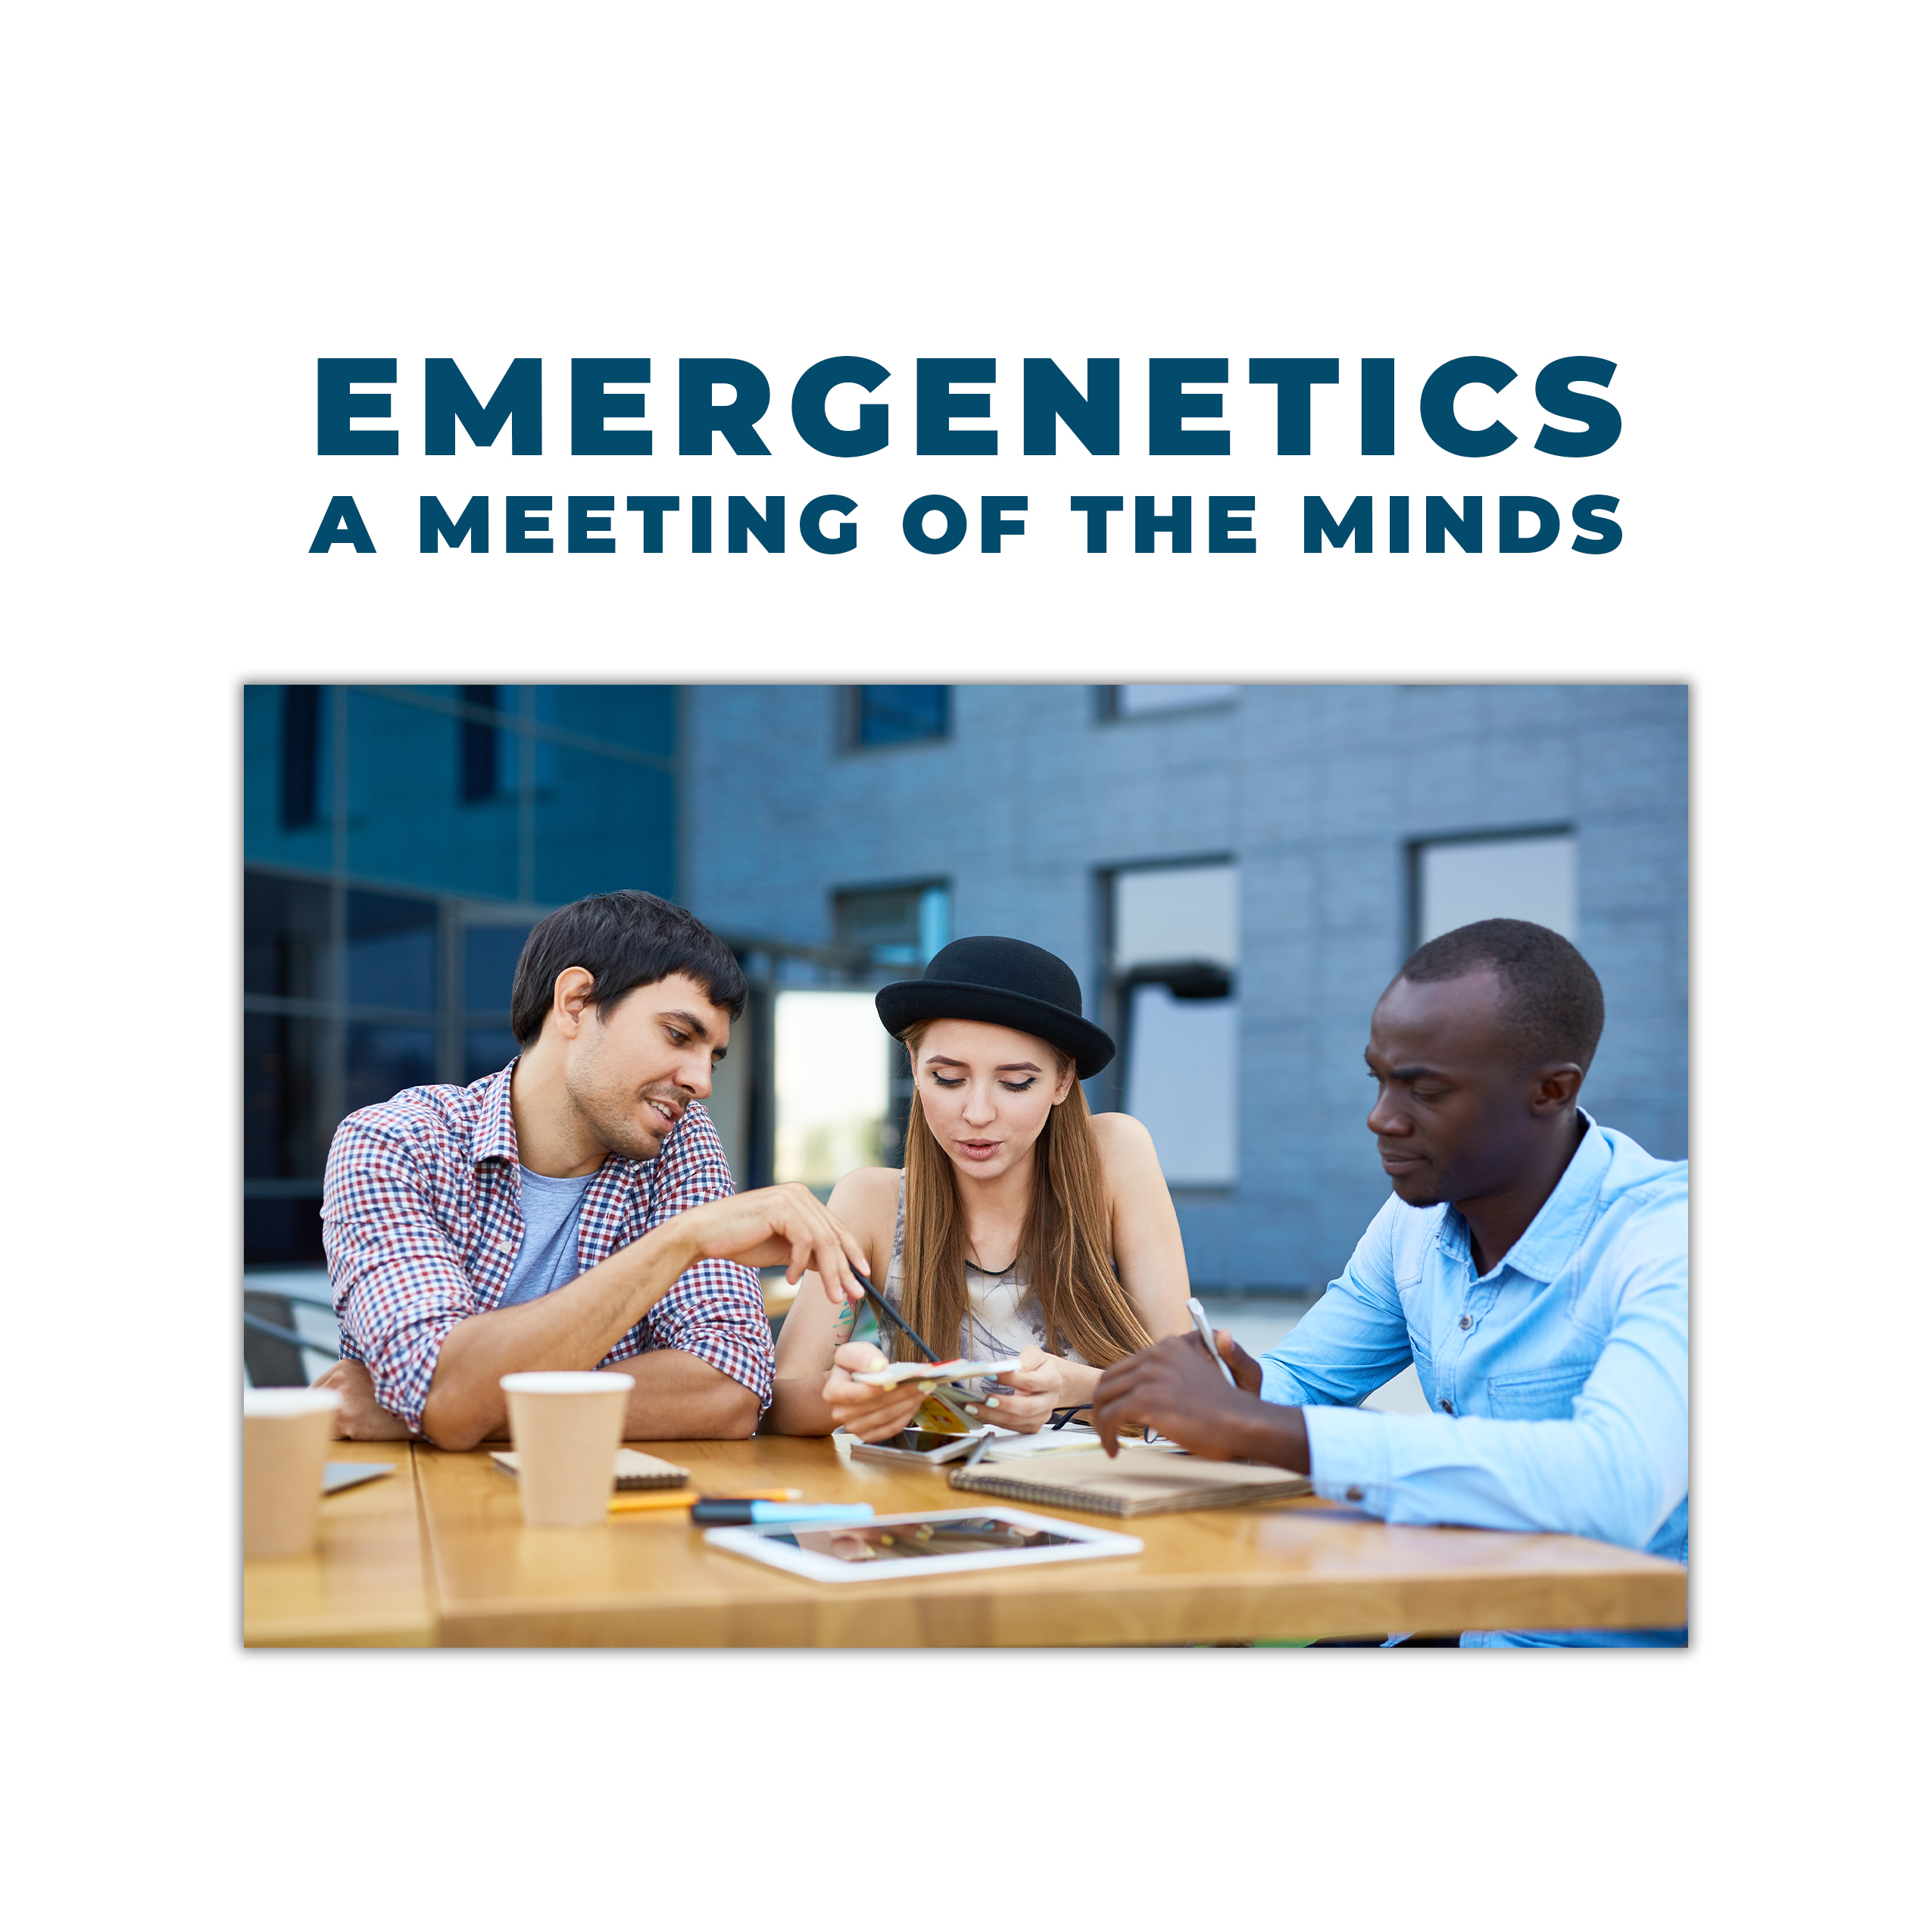 Emergenetics: A Meeting of the Minds